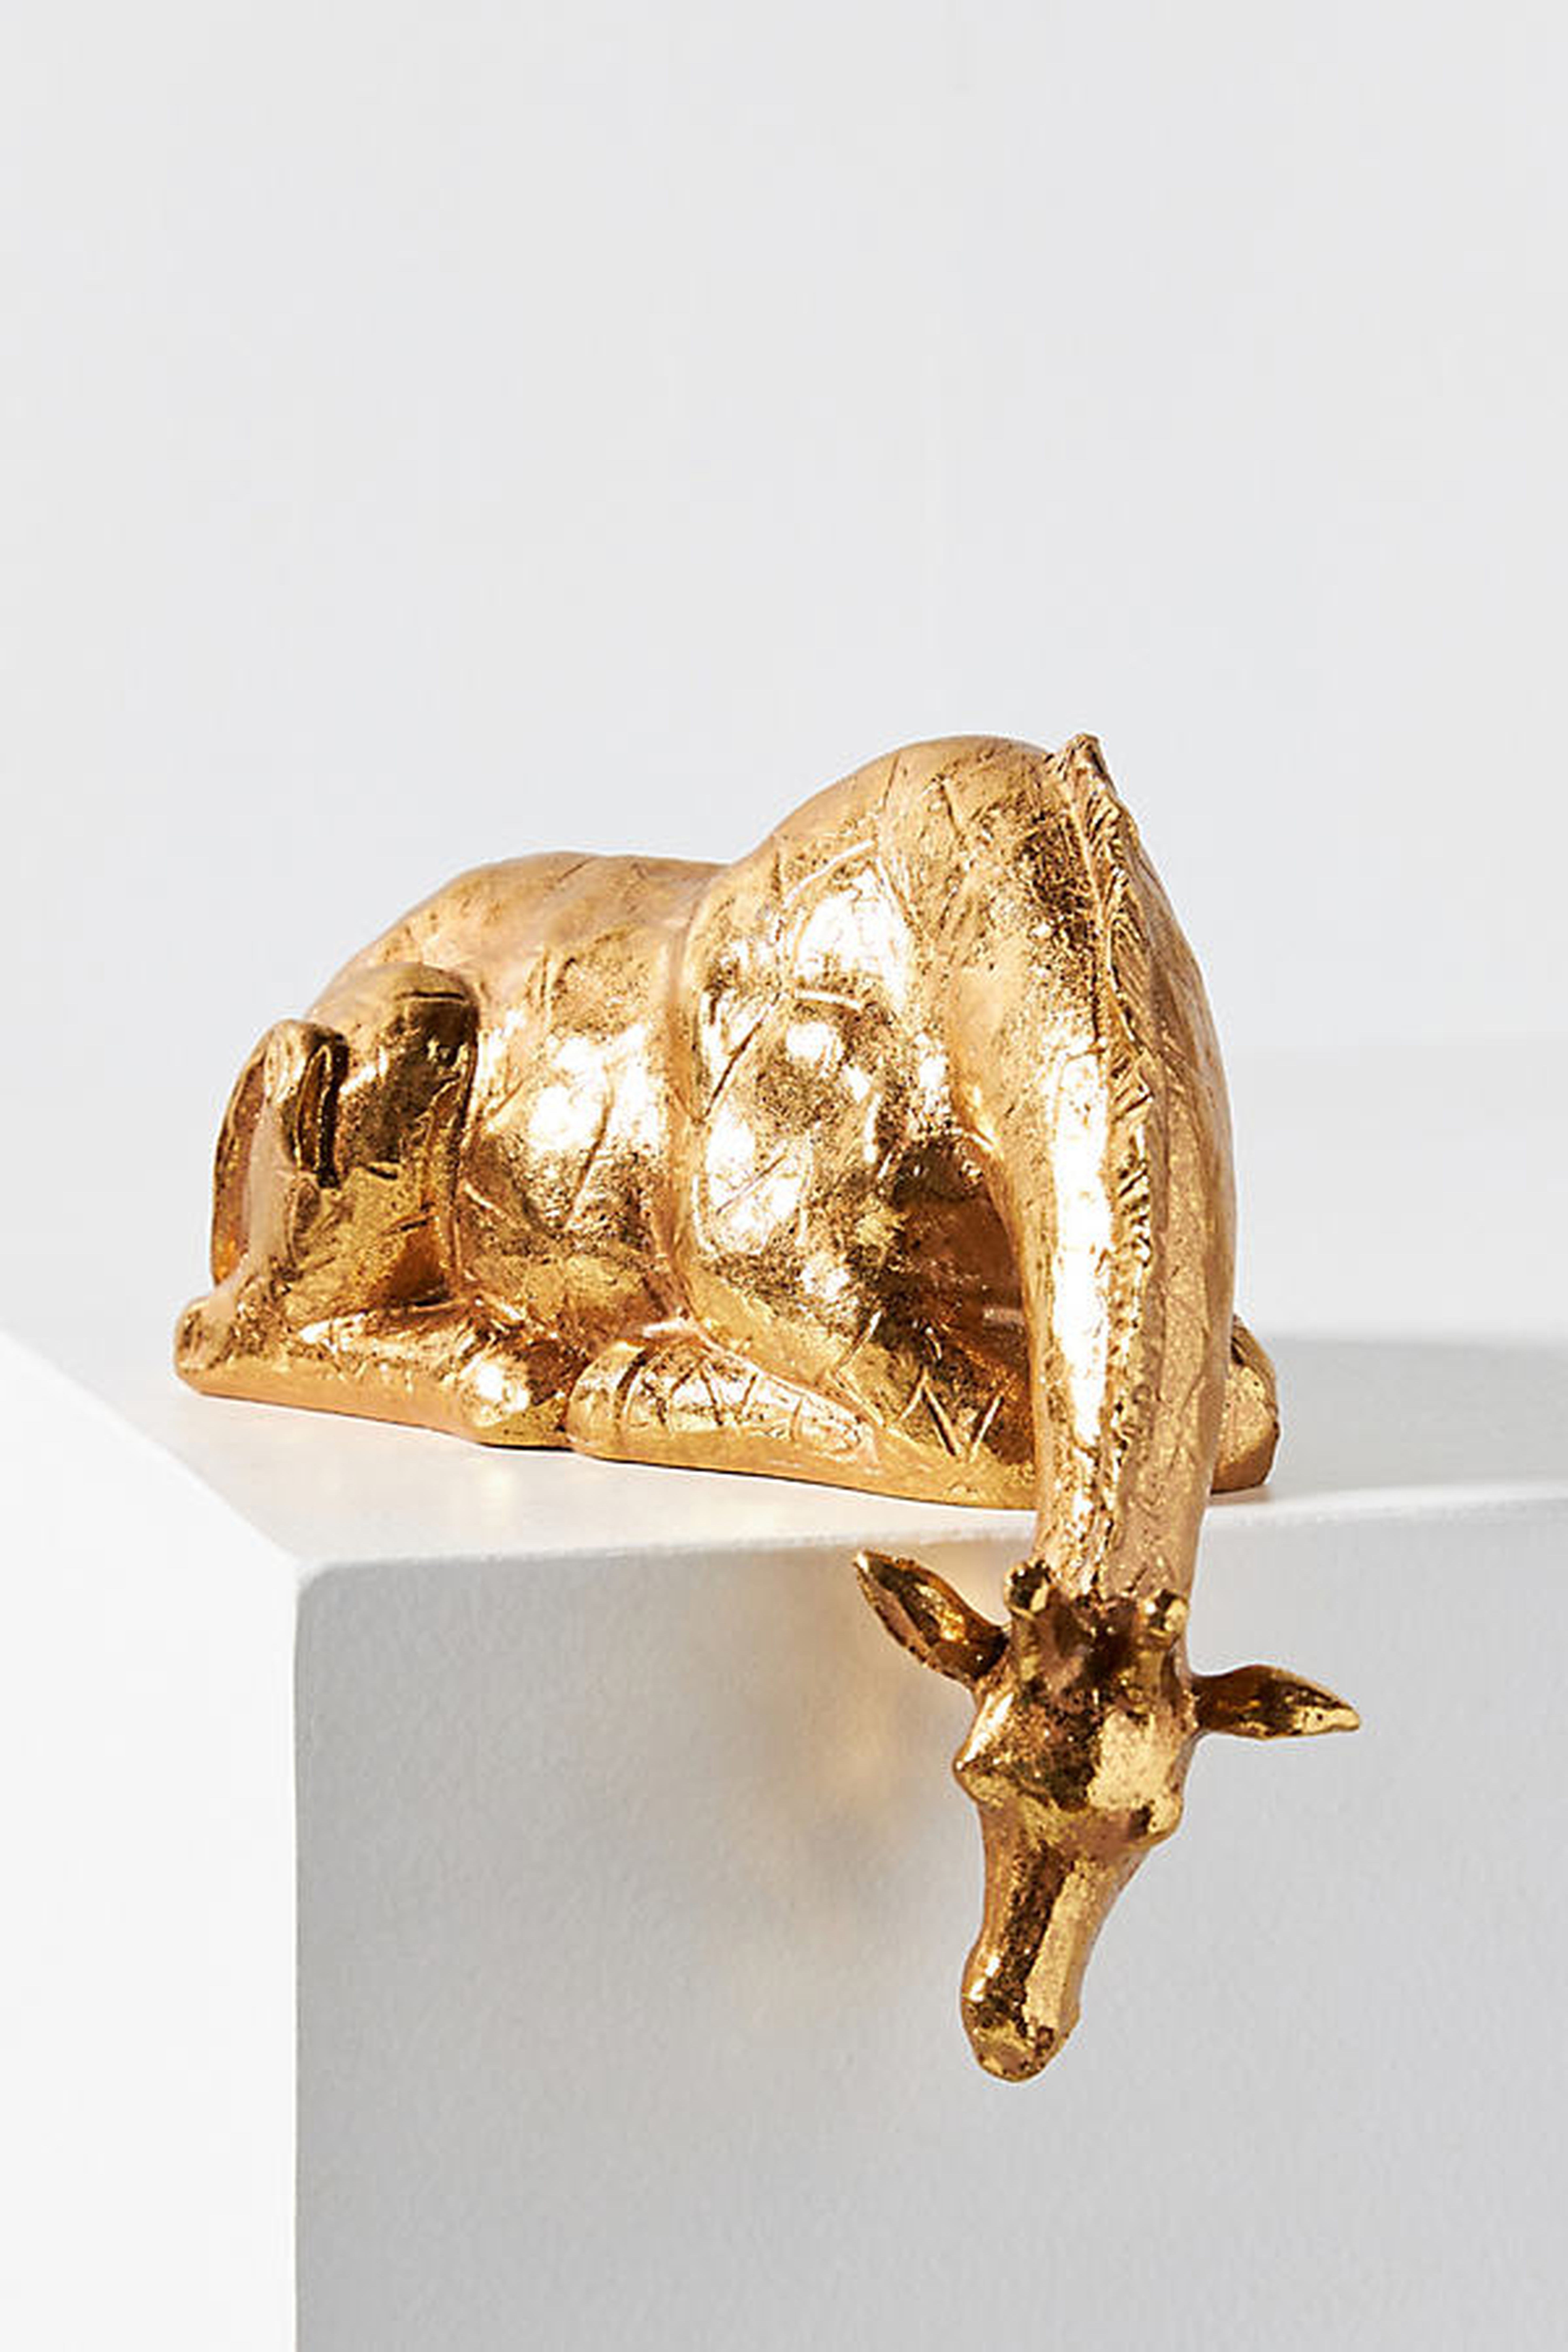 Giraffe Decorative Object By Anthropologie in Gold - Anthropologie